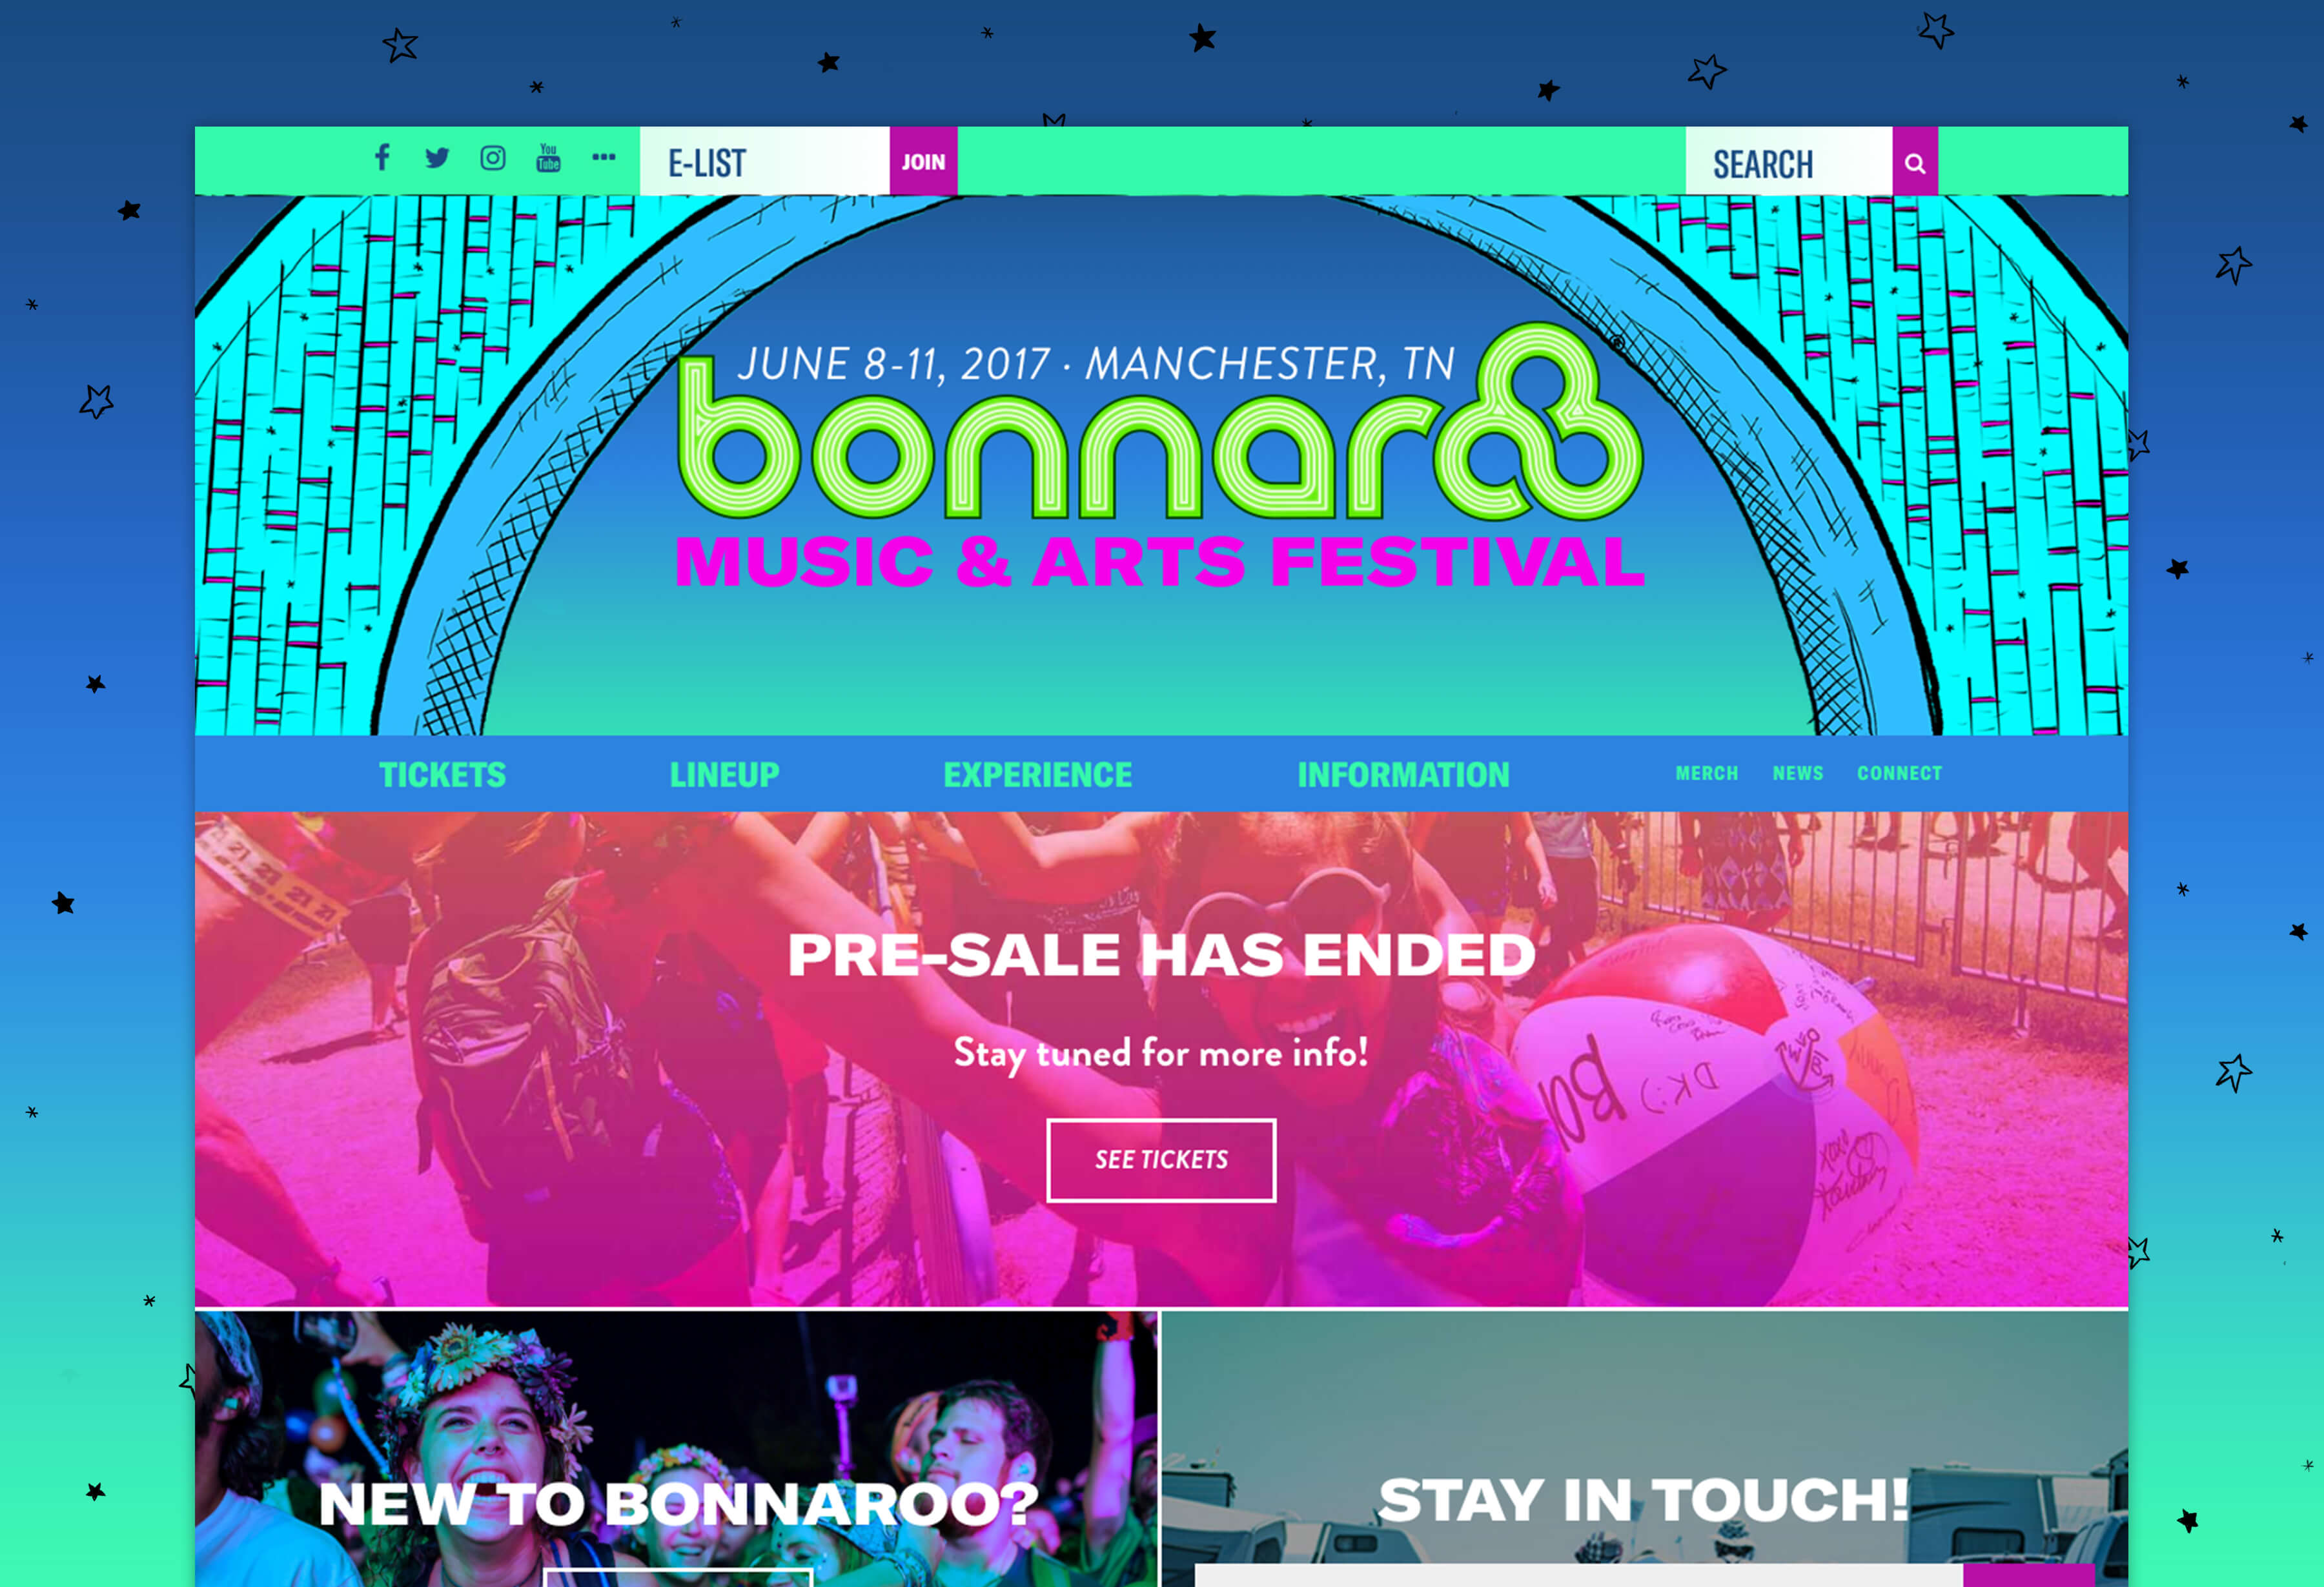 Snapshot of the Bonnaroo website front page as it would appear full-width.